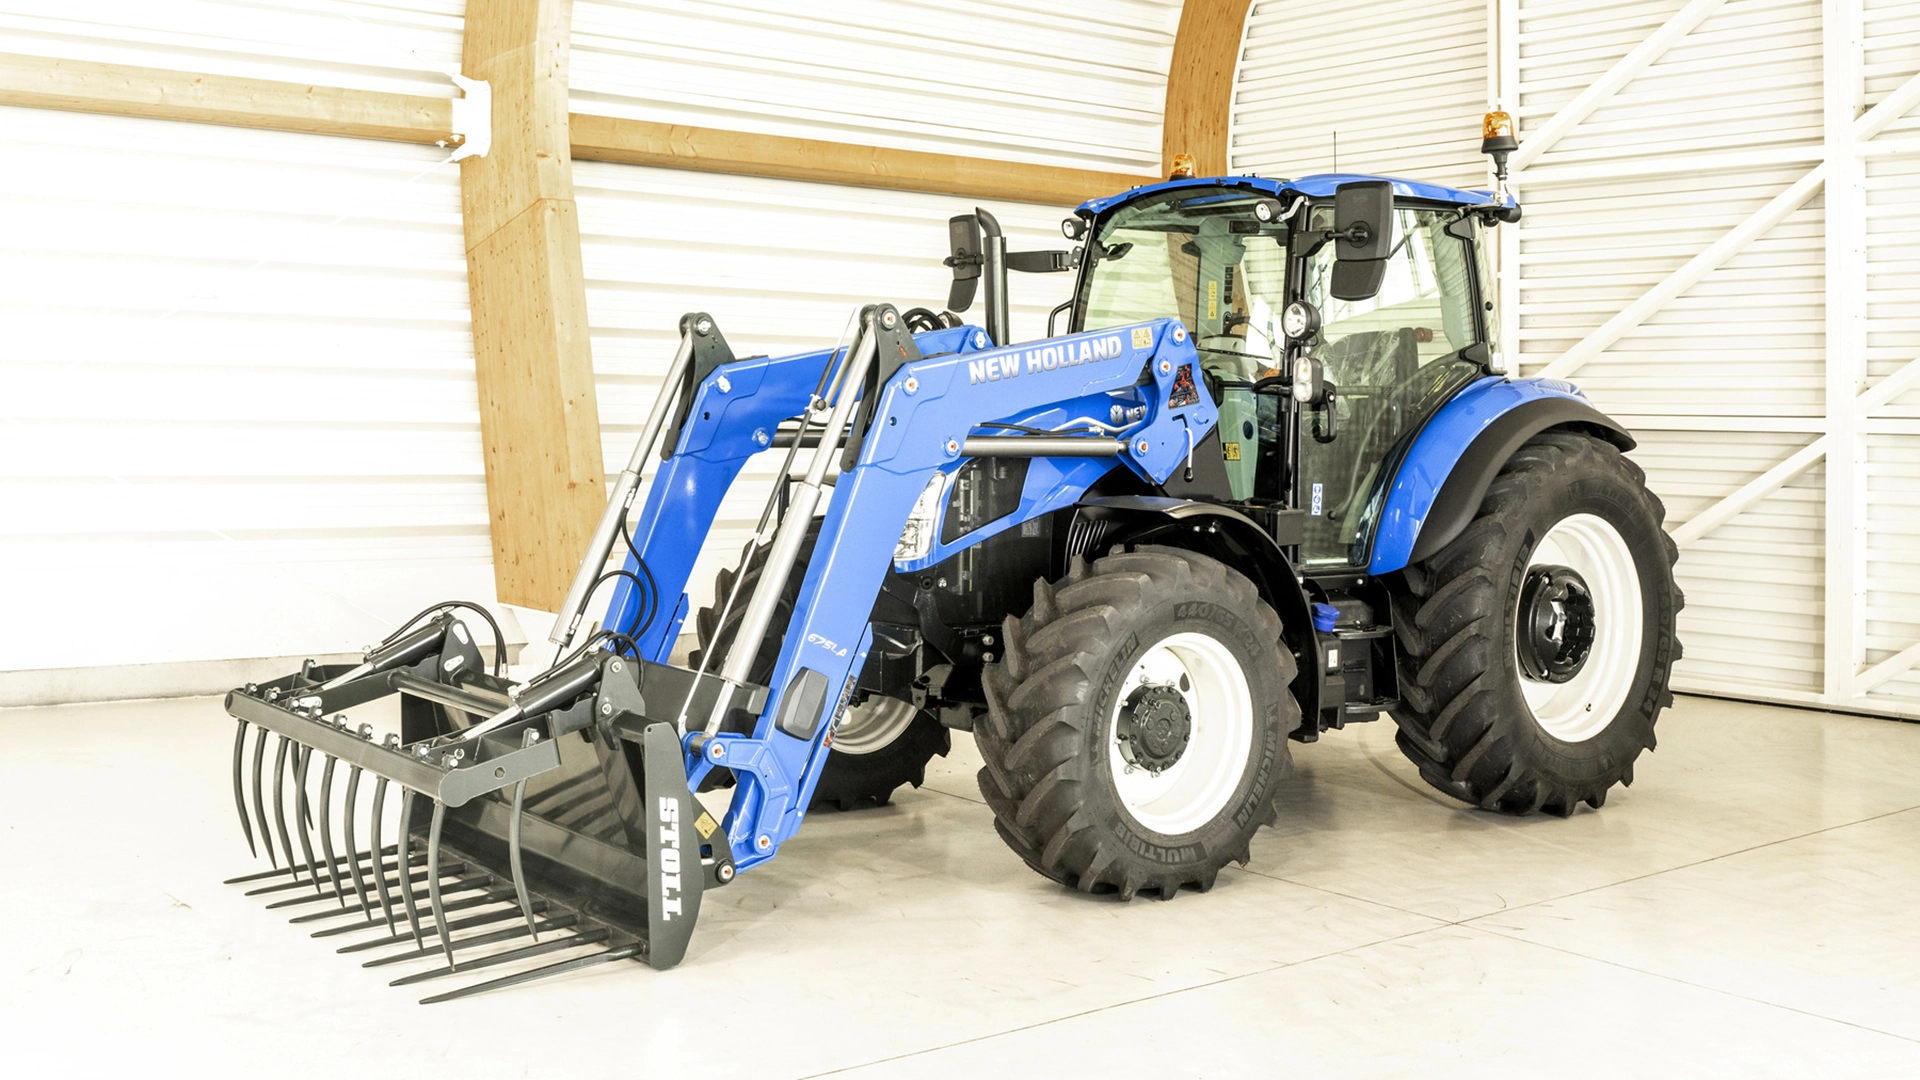 Blue New Holland tractor equipped with a loader grapple bucket, displayed indoors.